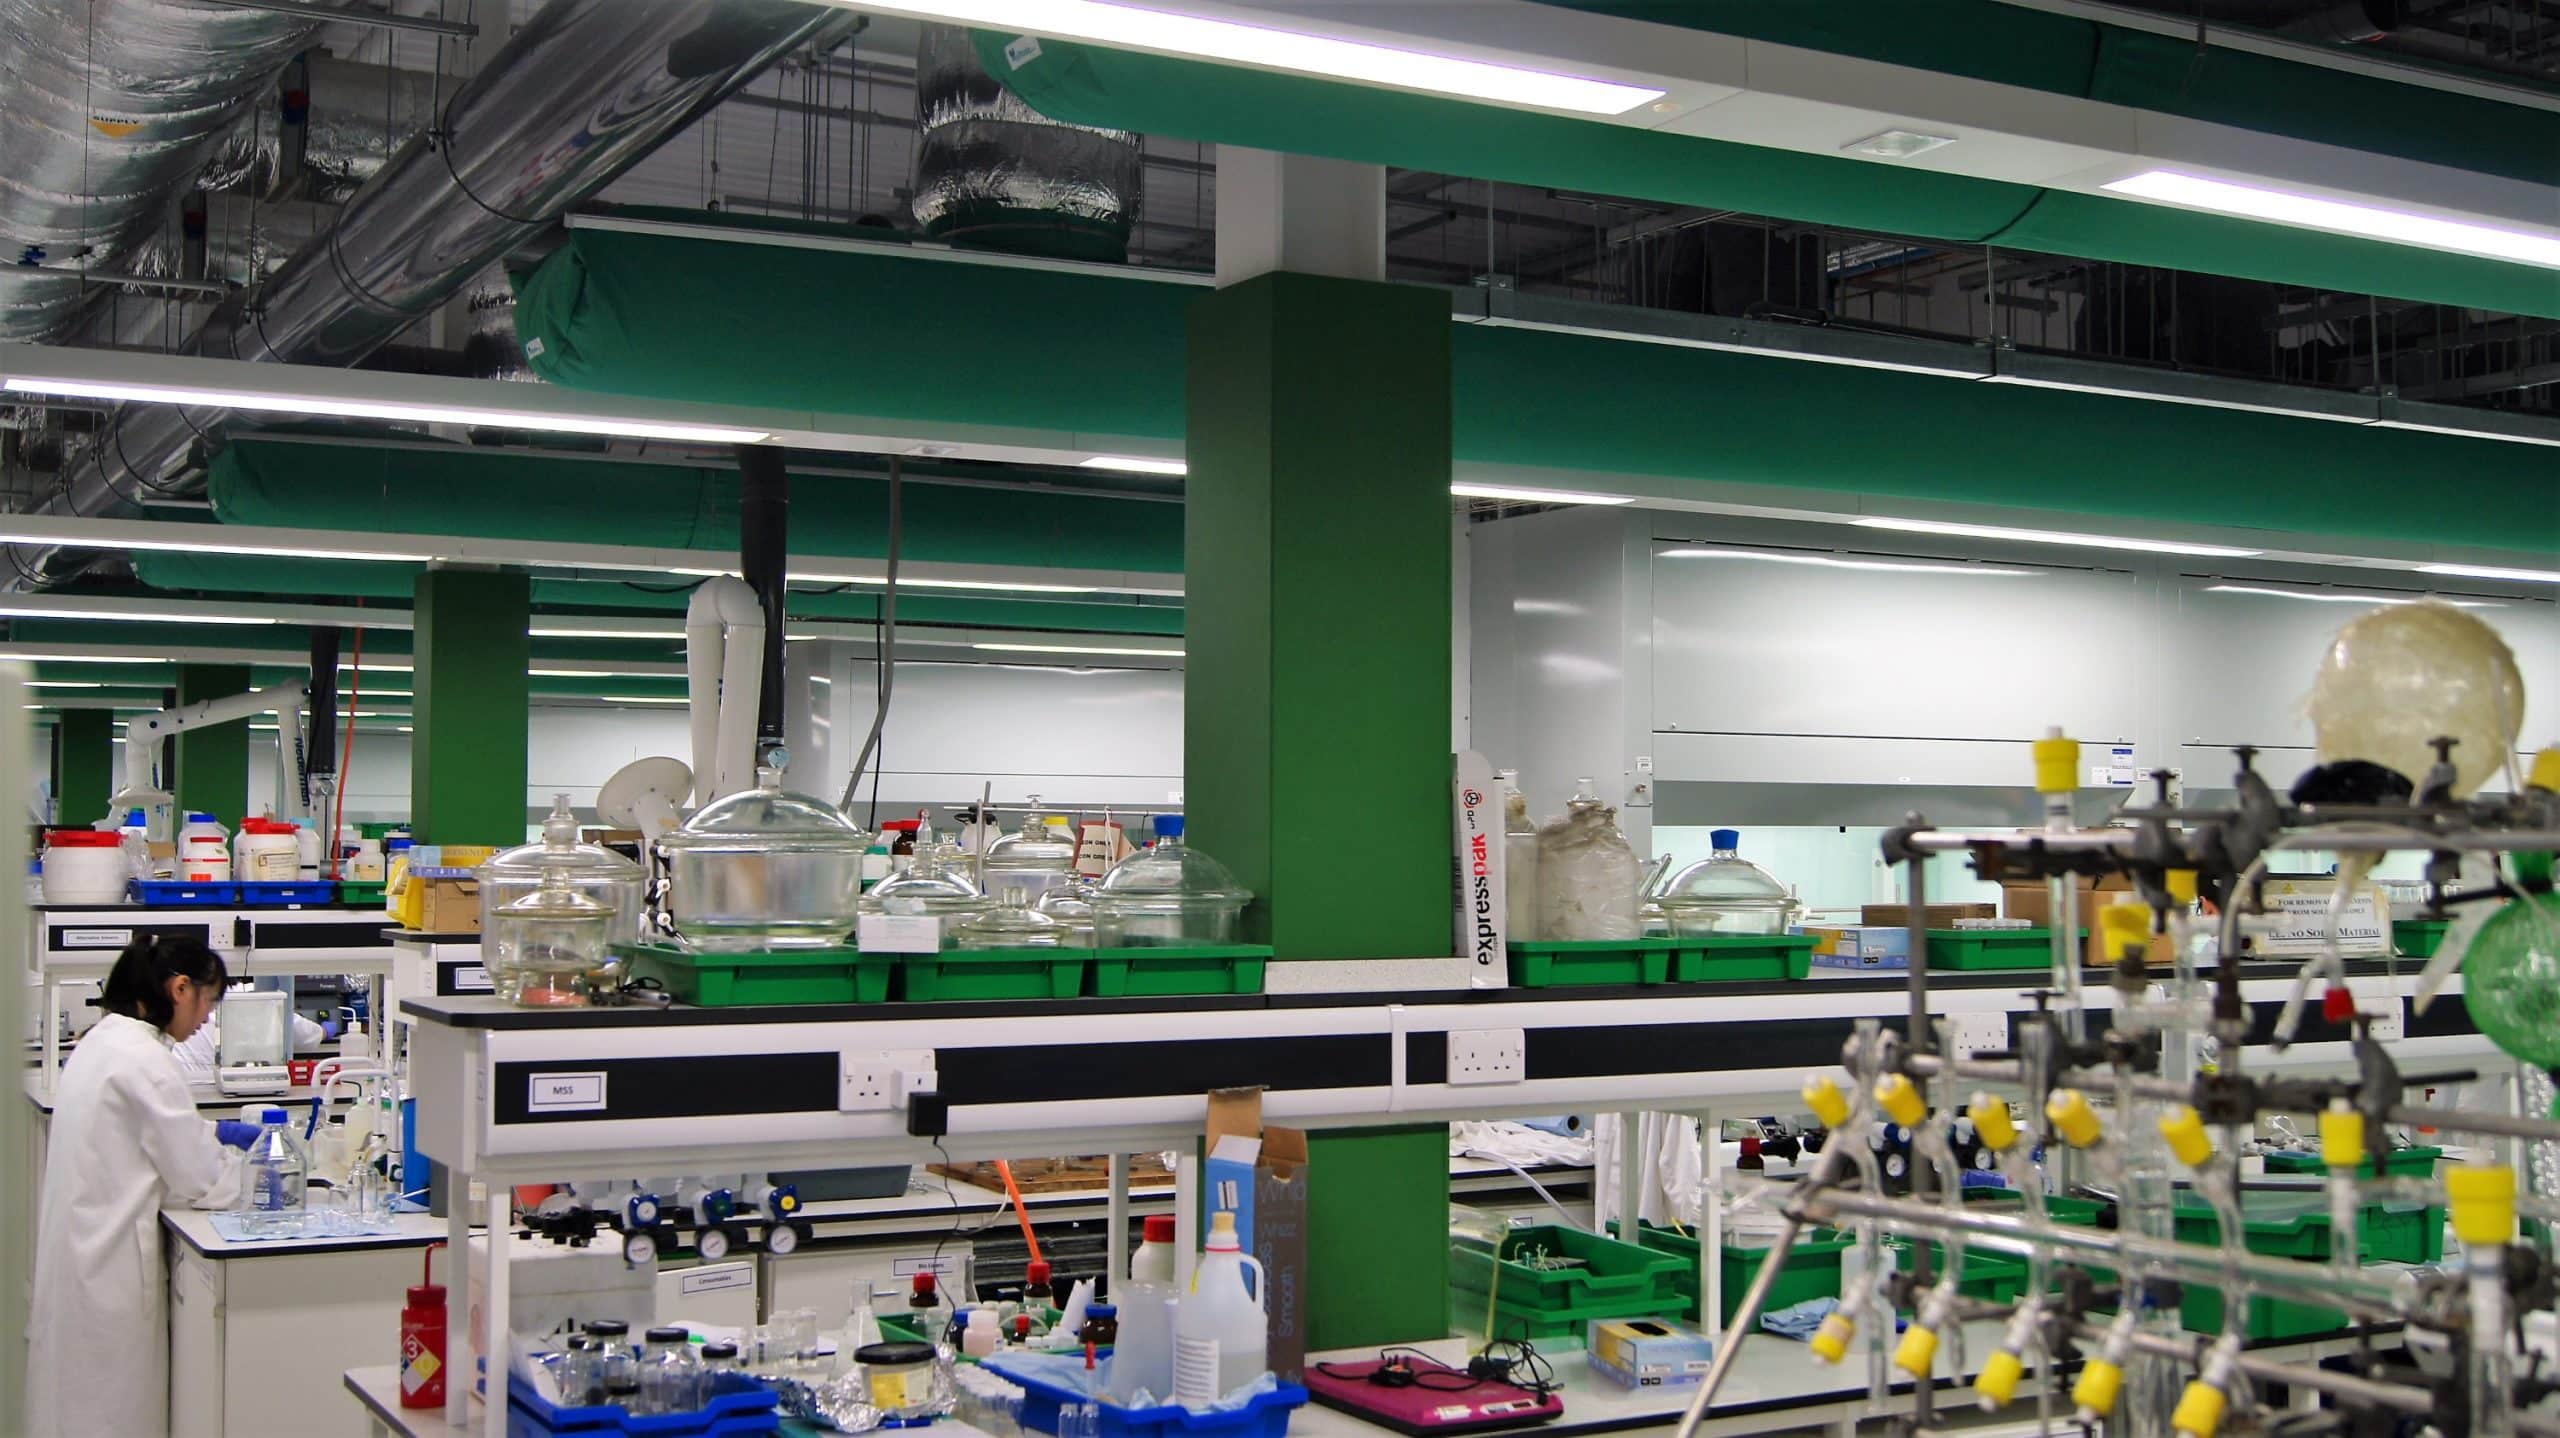 Green fabric ducts in a University of York laboratory